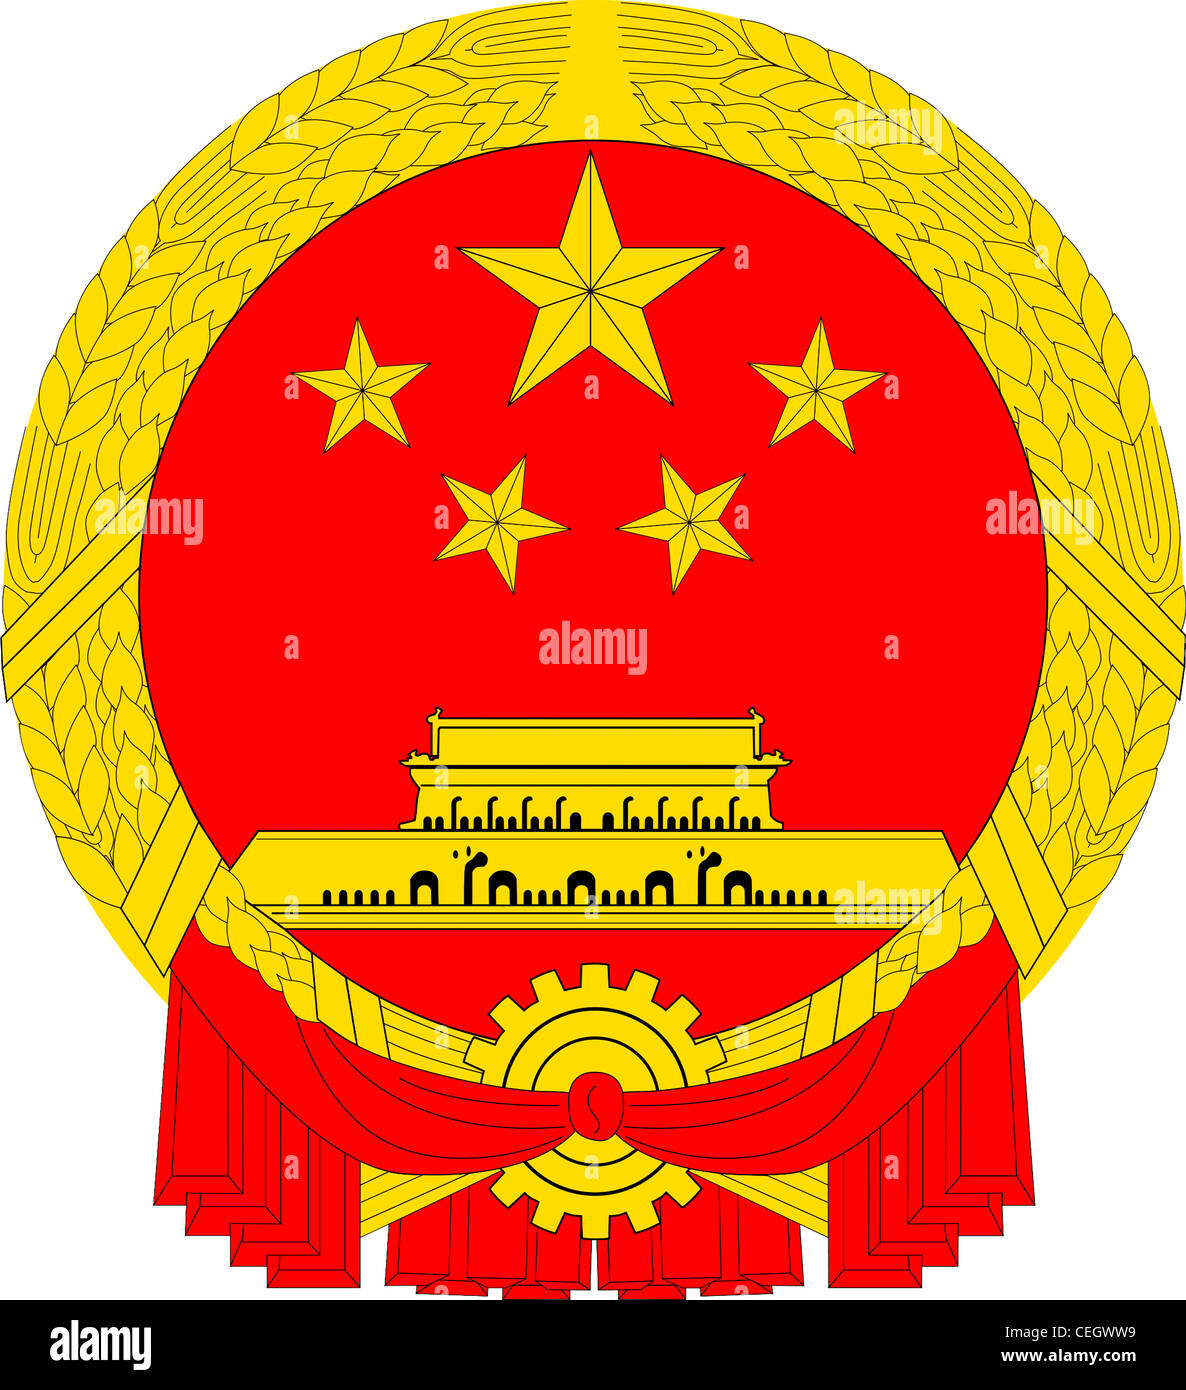 National coat of arms of the People's Republic of China. Stock Photo